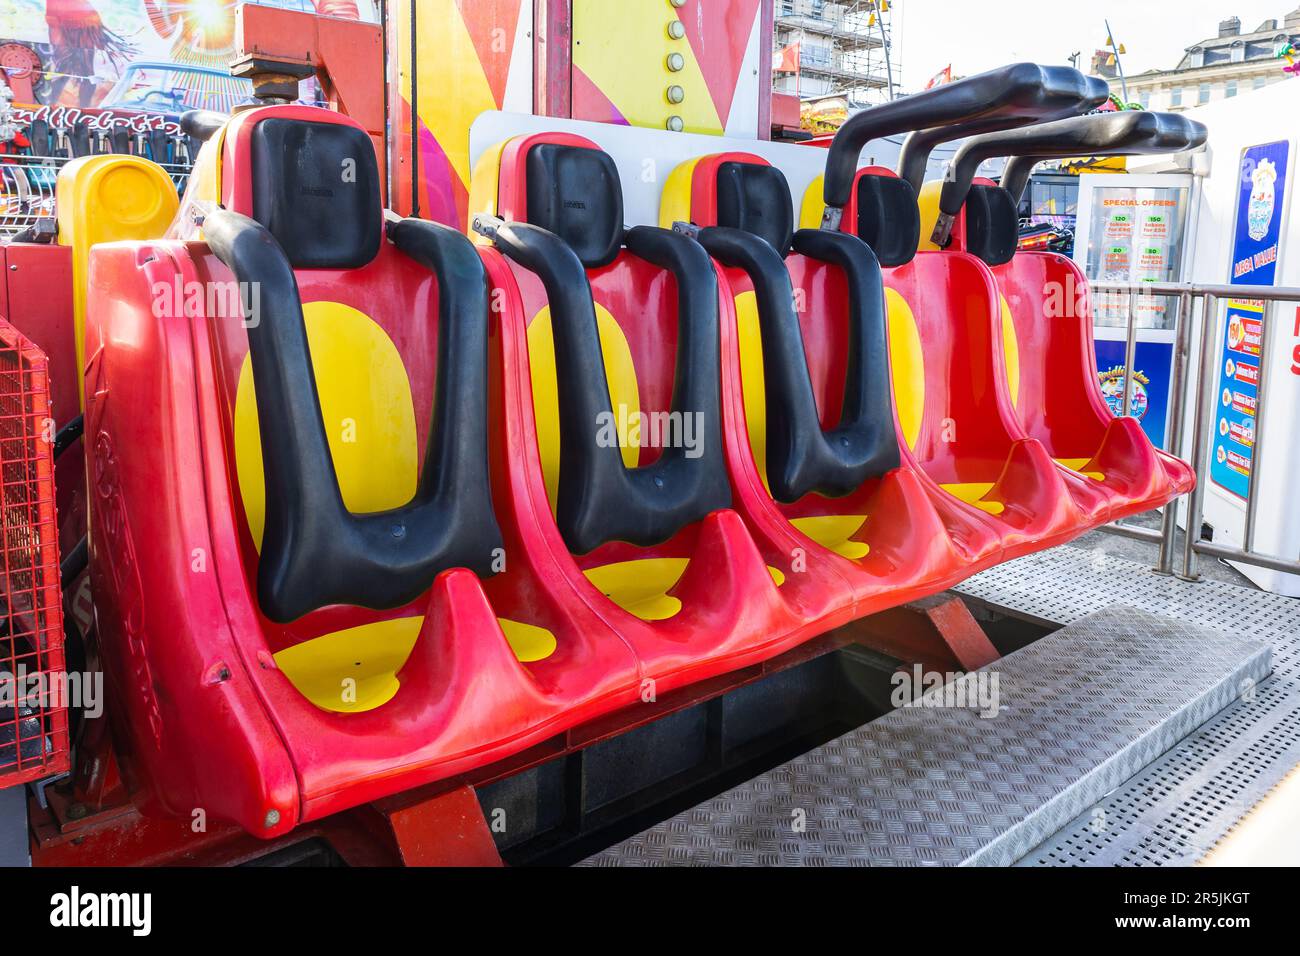 Over-the-shoulder restraints on a small drop tower fairground ride. Stock Photo